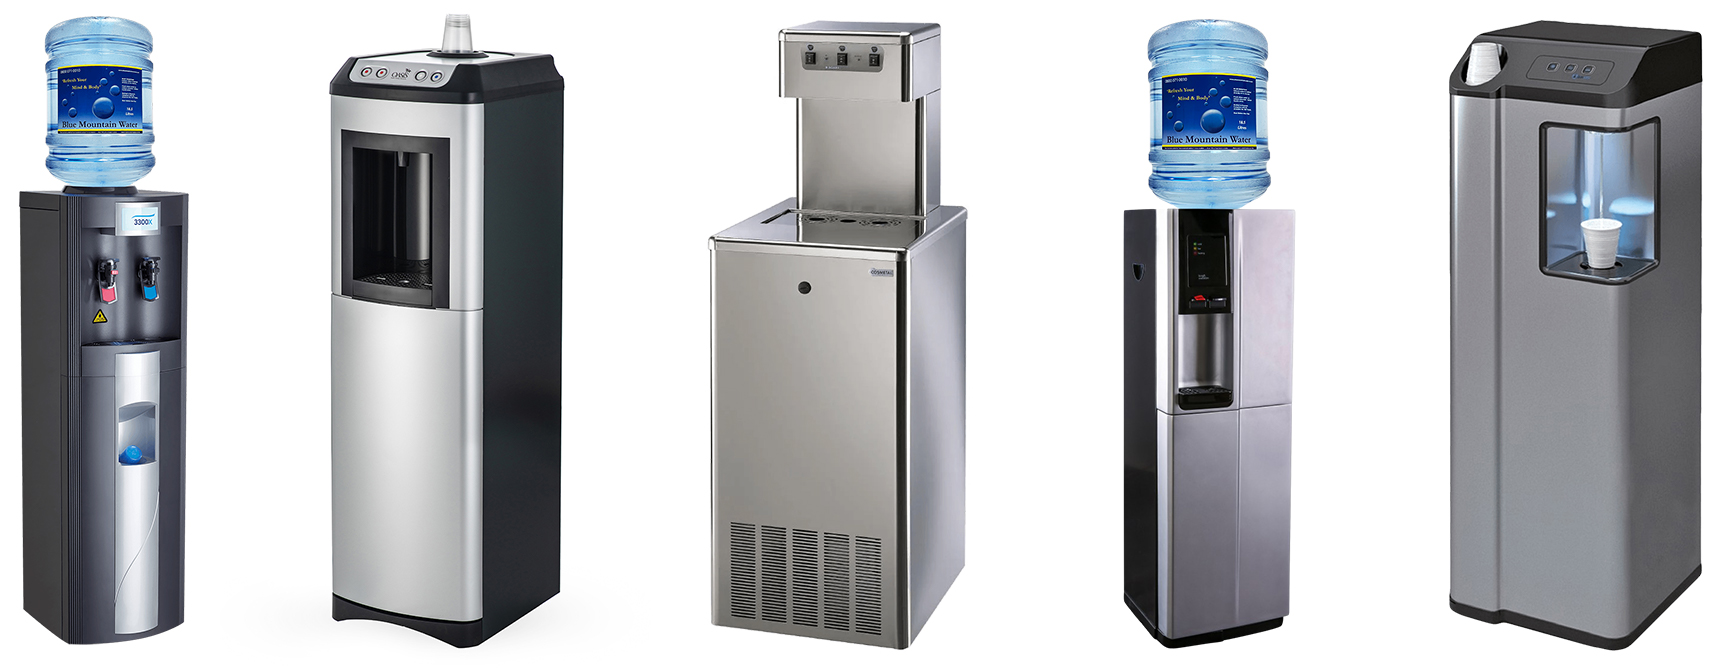 water coolers collage